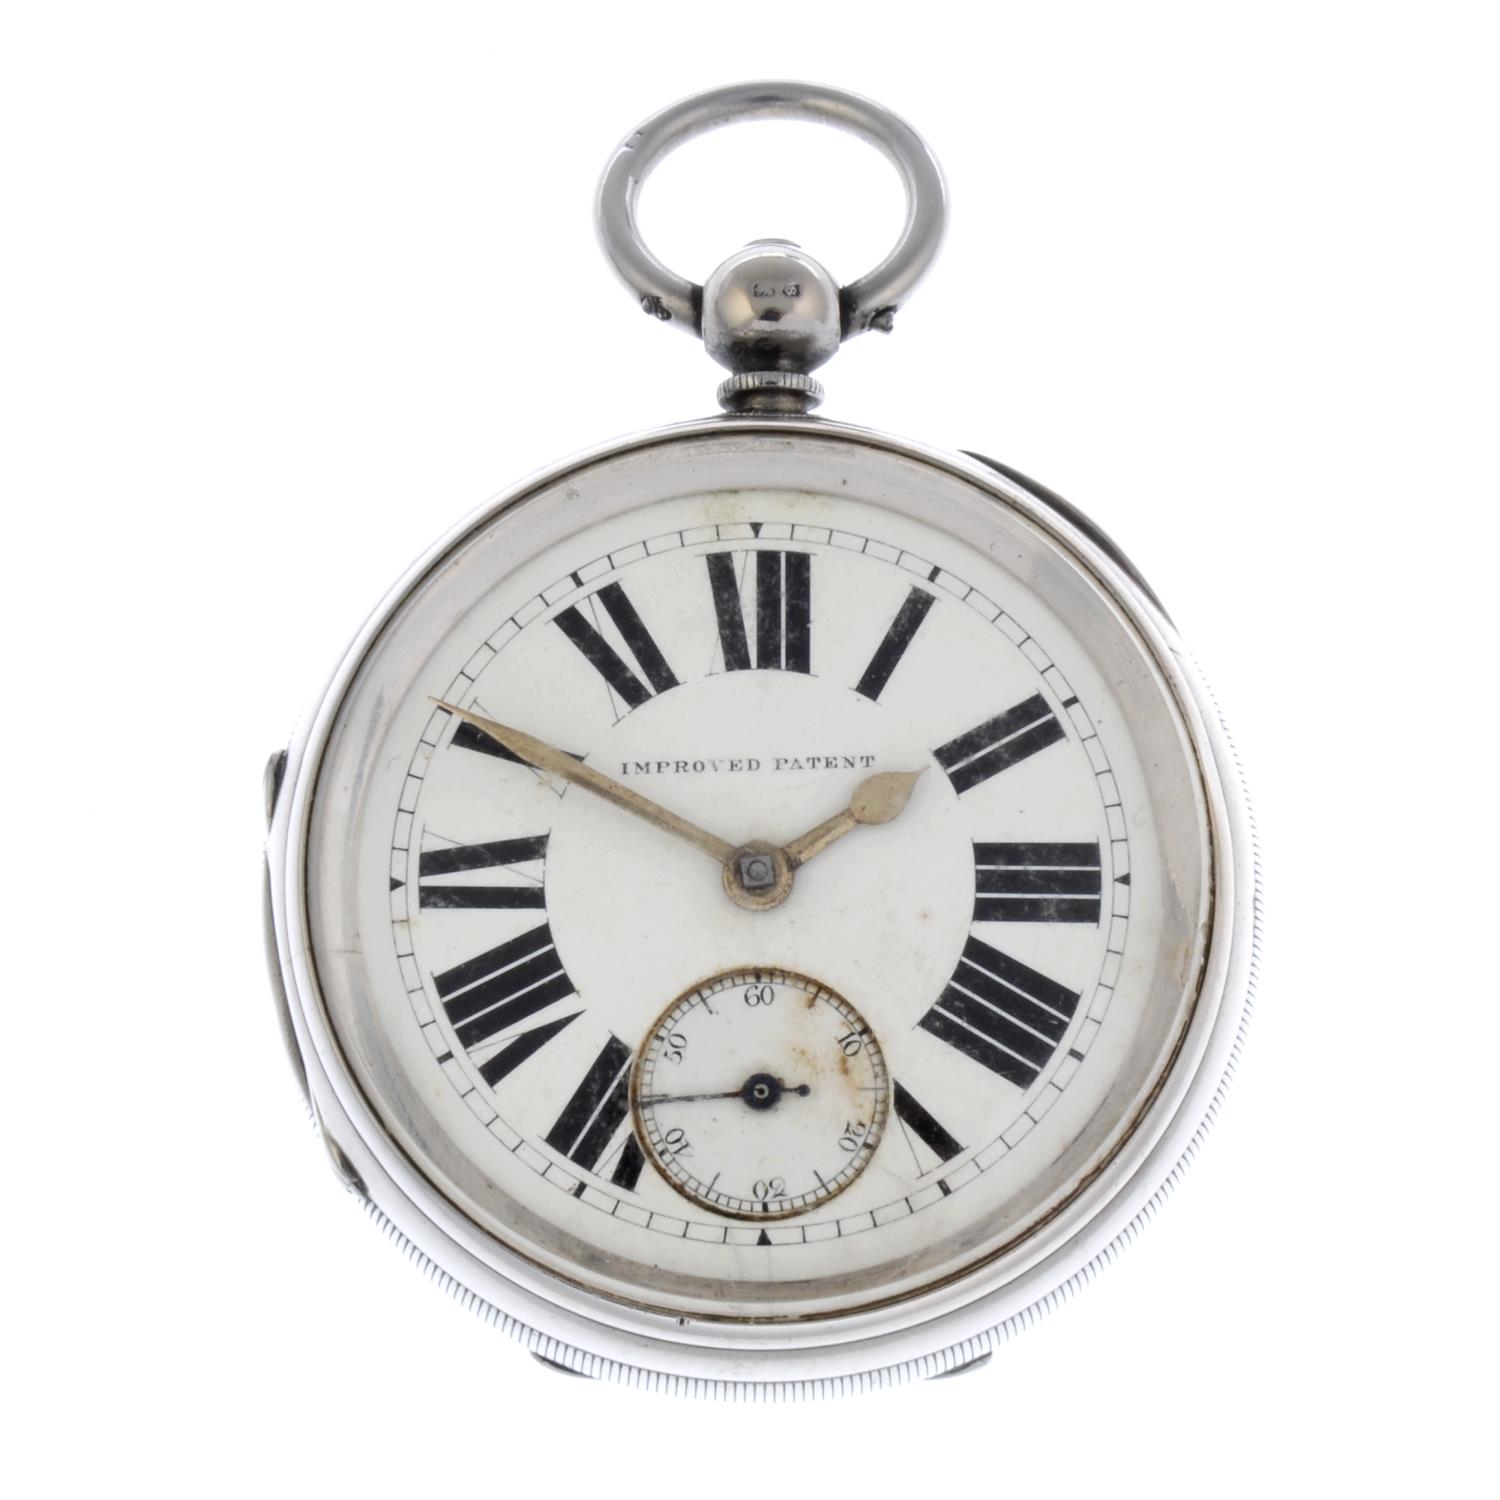 An open face pocket watch by E Wise.